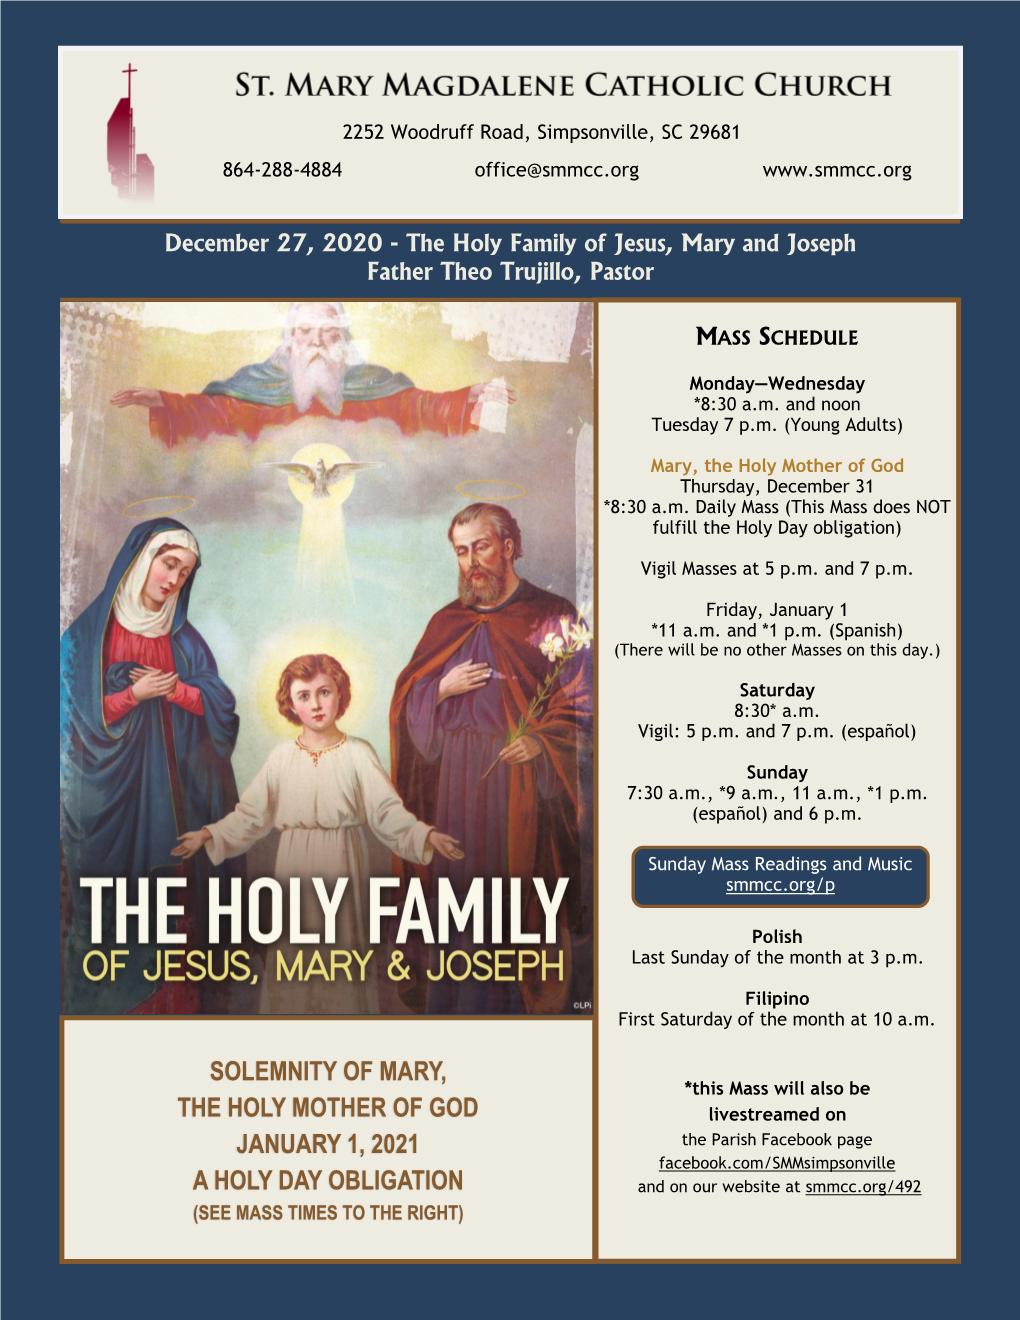 Solemnity of Mary, the Holy Mother of God January 1